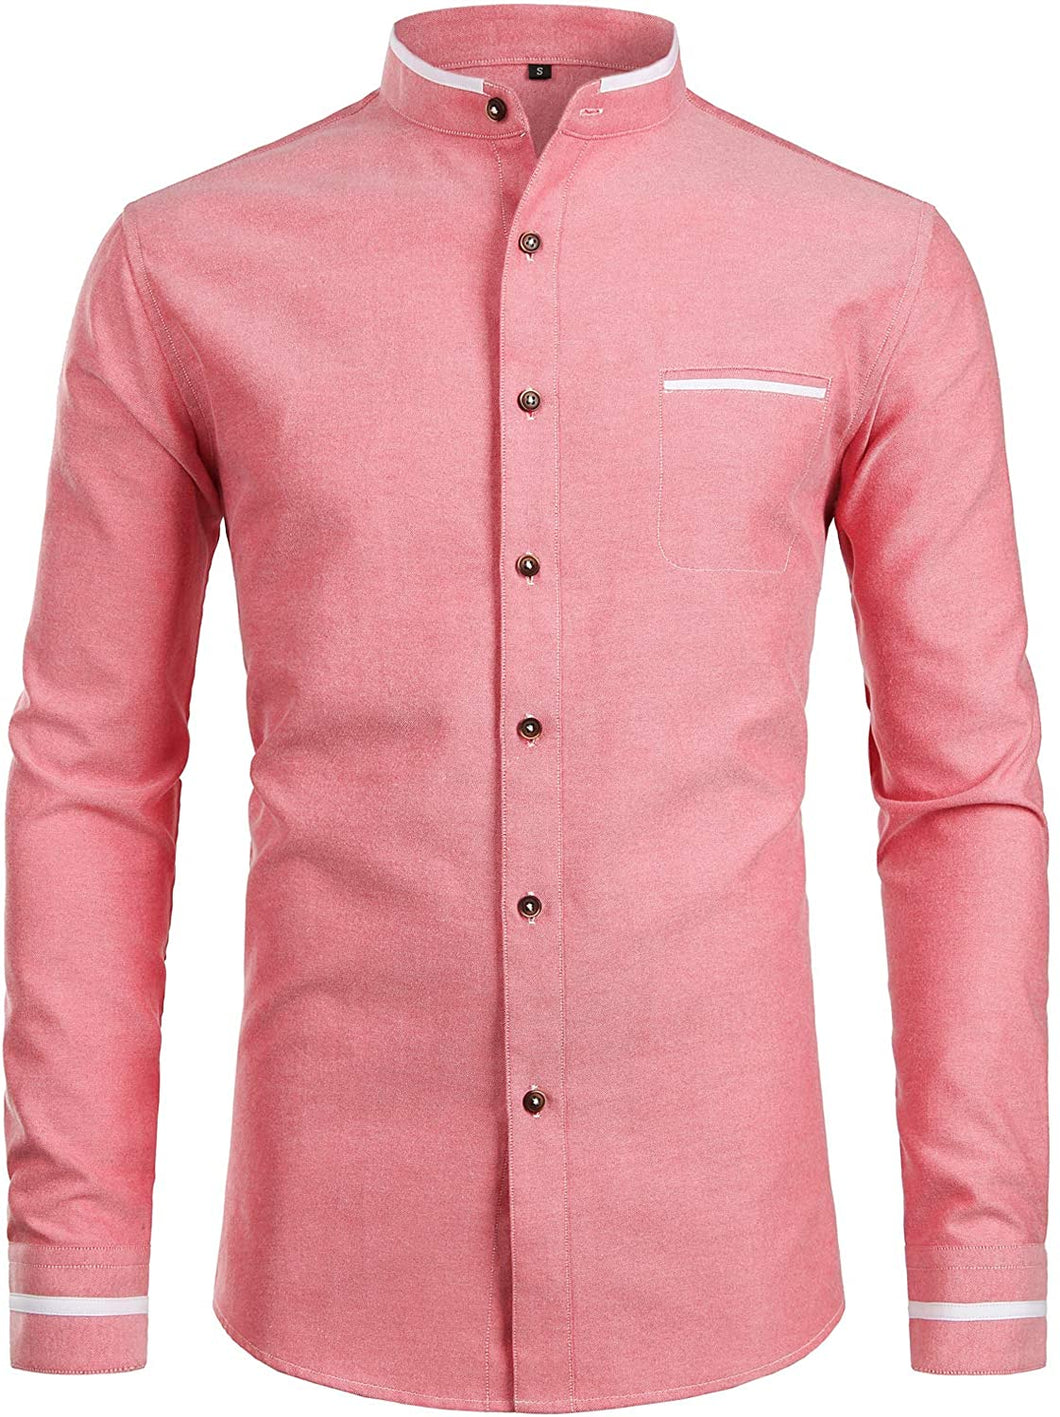 Mandarin Collar Slim Fit Button Down Red Long Sleeve Shirt with Pocket